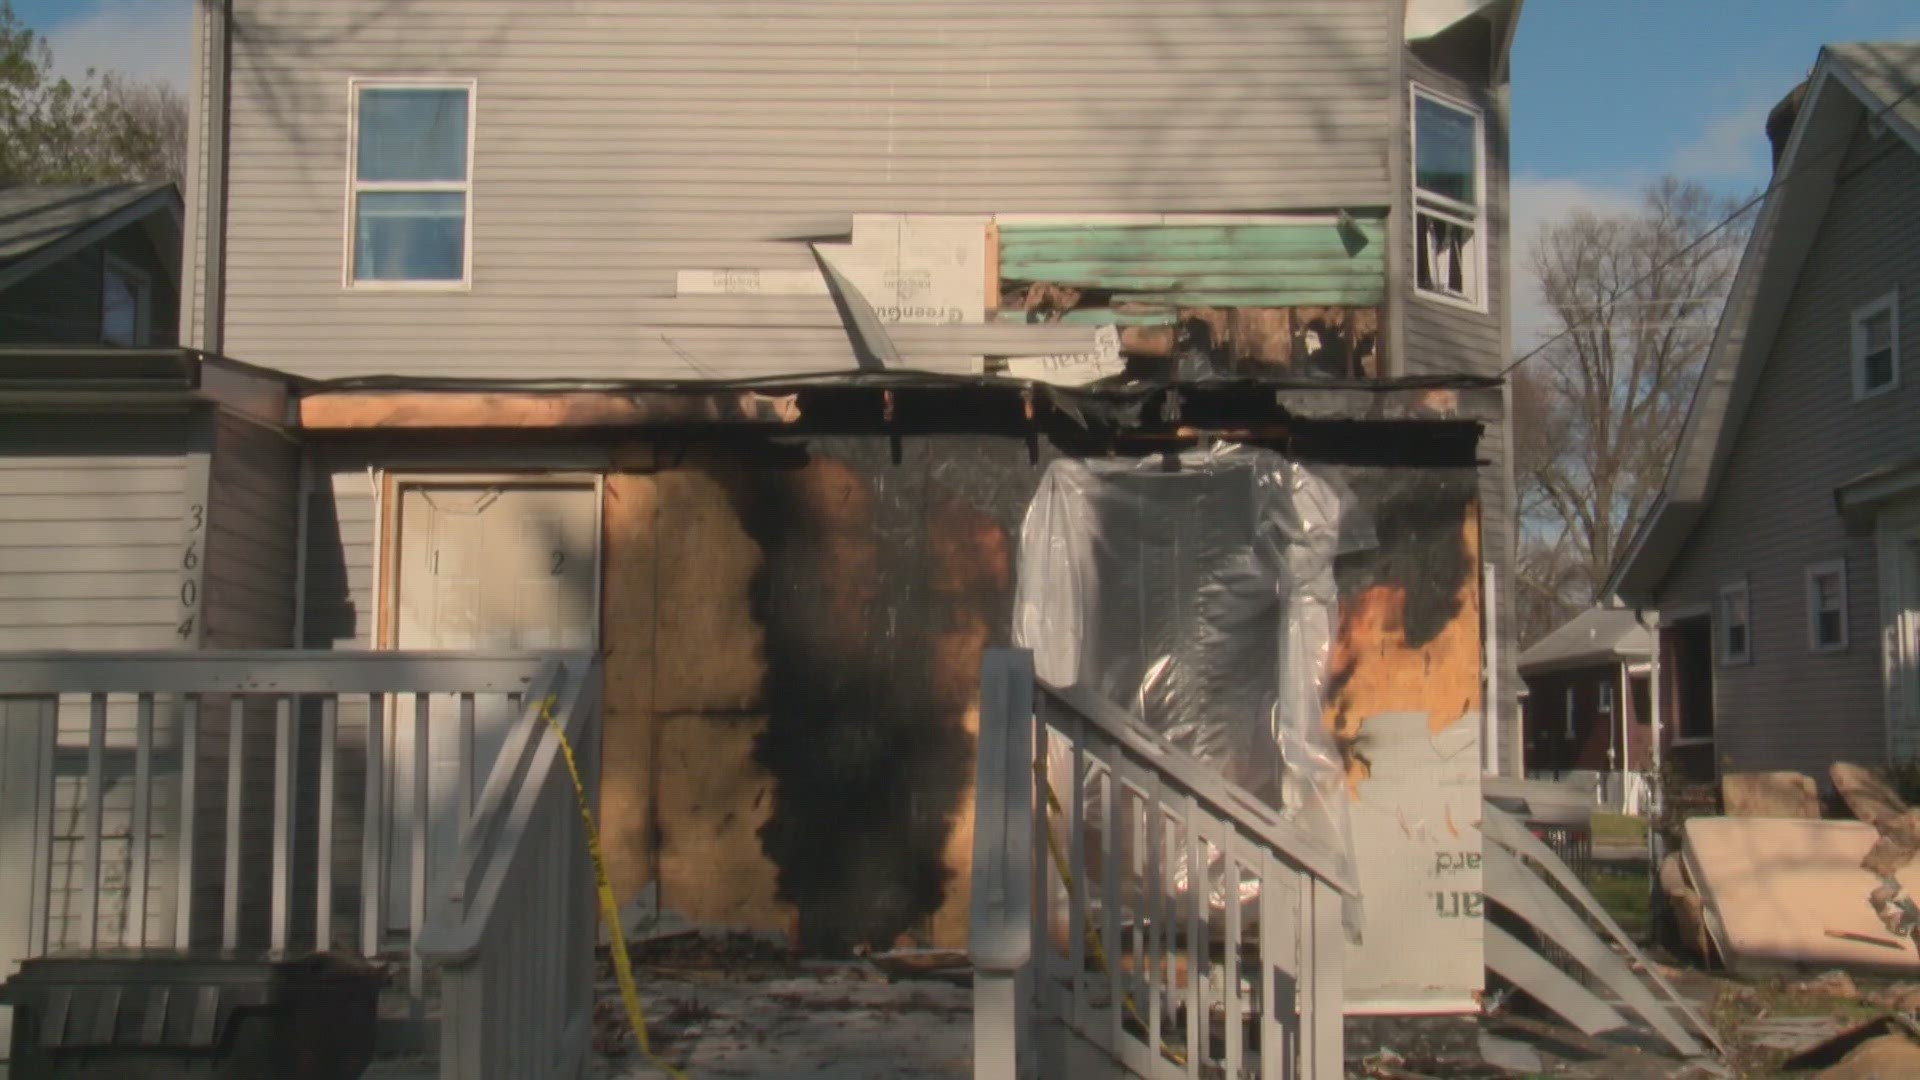 A woman is dead after an apartment fire in Louisville Tuesday morning.